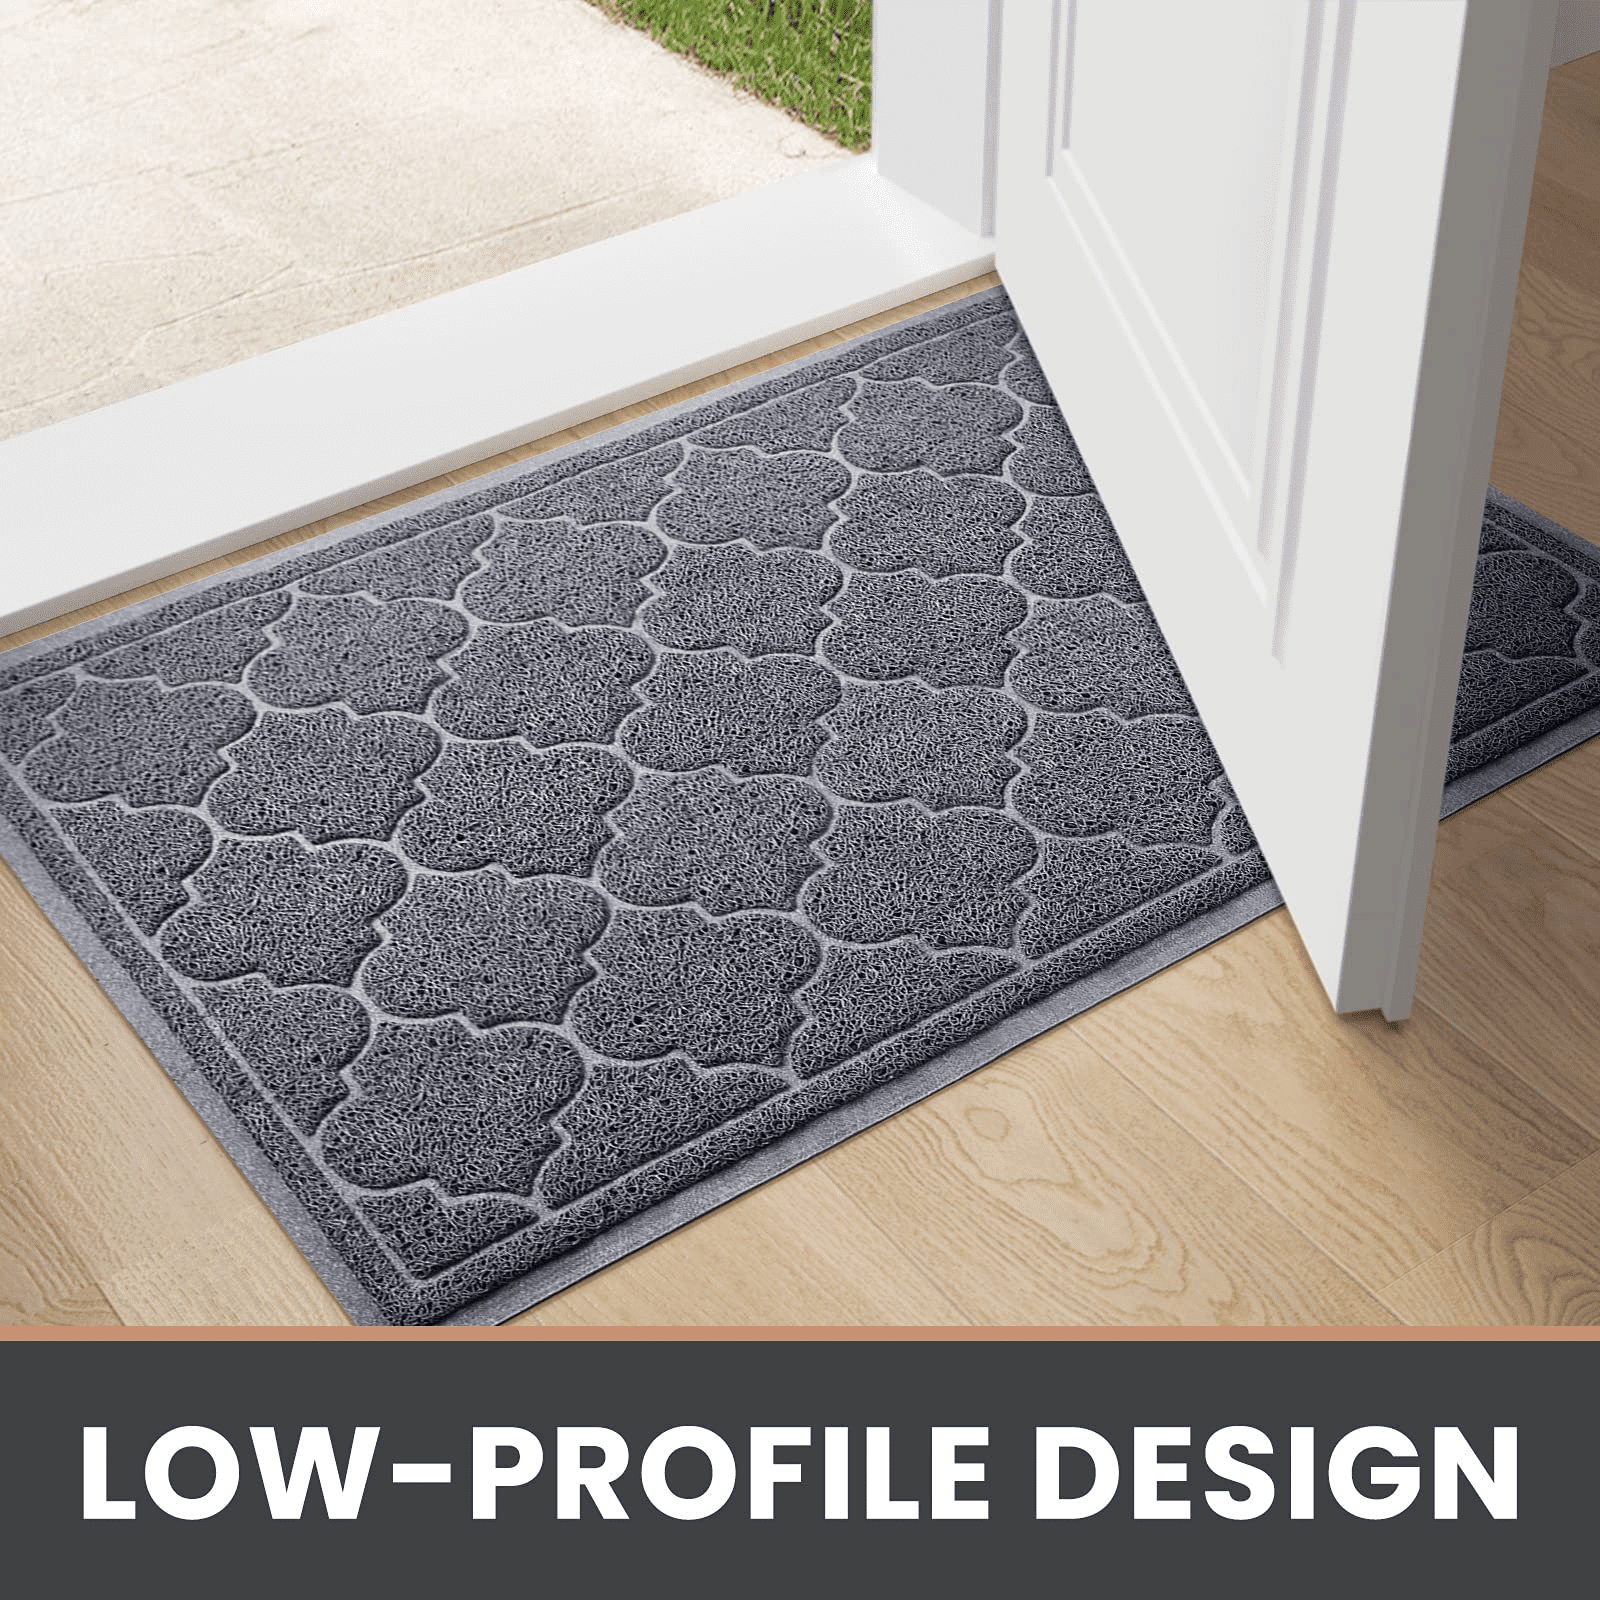 Door Mat Home Welcome Mat Outdoor and Indoor, Heavy-Duty Low-Profile  Non-Slip Durable Front Welcome Mat Doormat for Home Entrance, Outside Entry,  Yard, Floor, Patio (30''x17.5'', Grey)